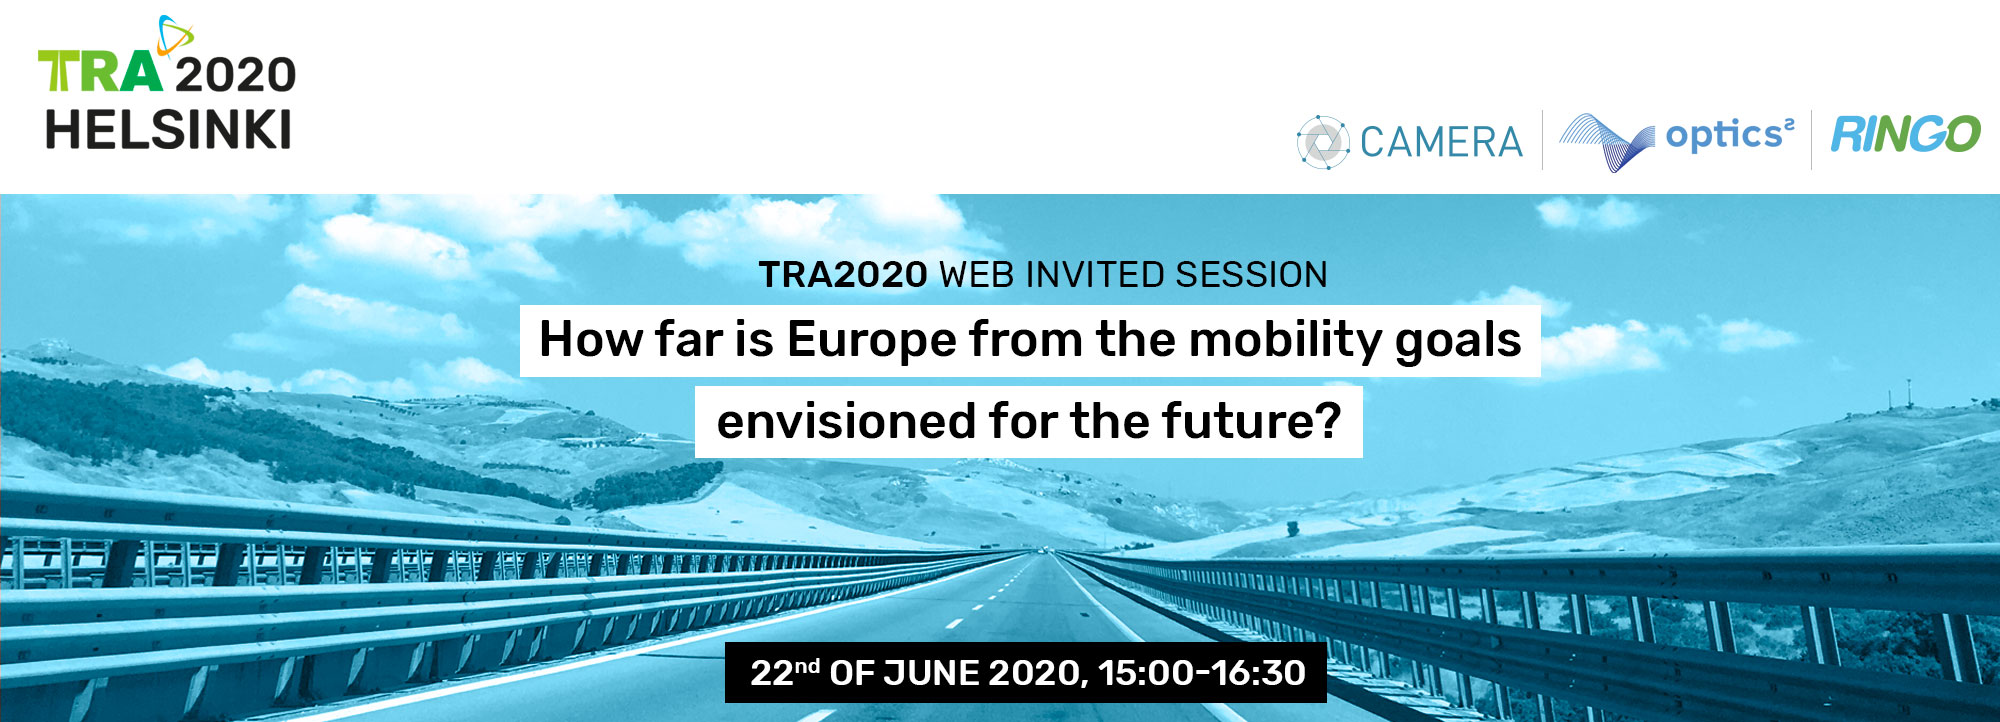 Welcome to the TRA2020 Invited Session on Mobility